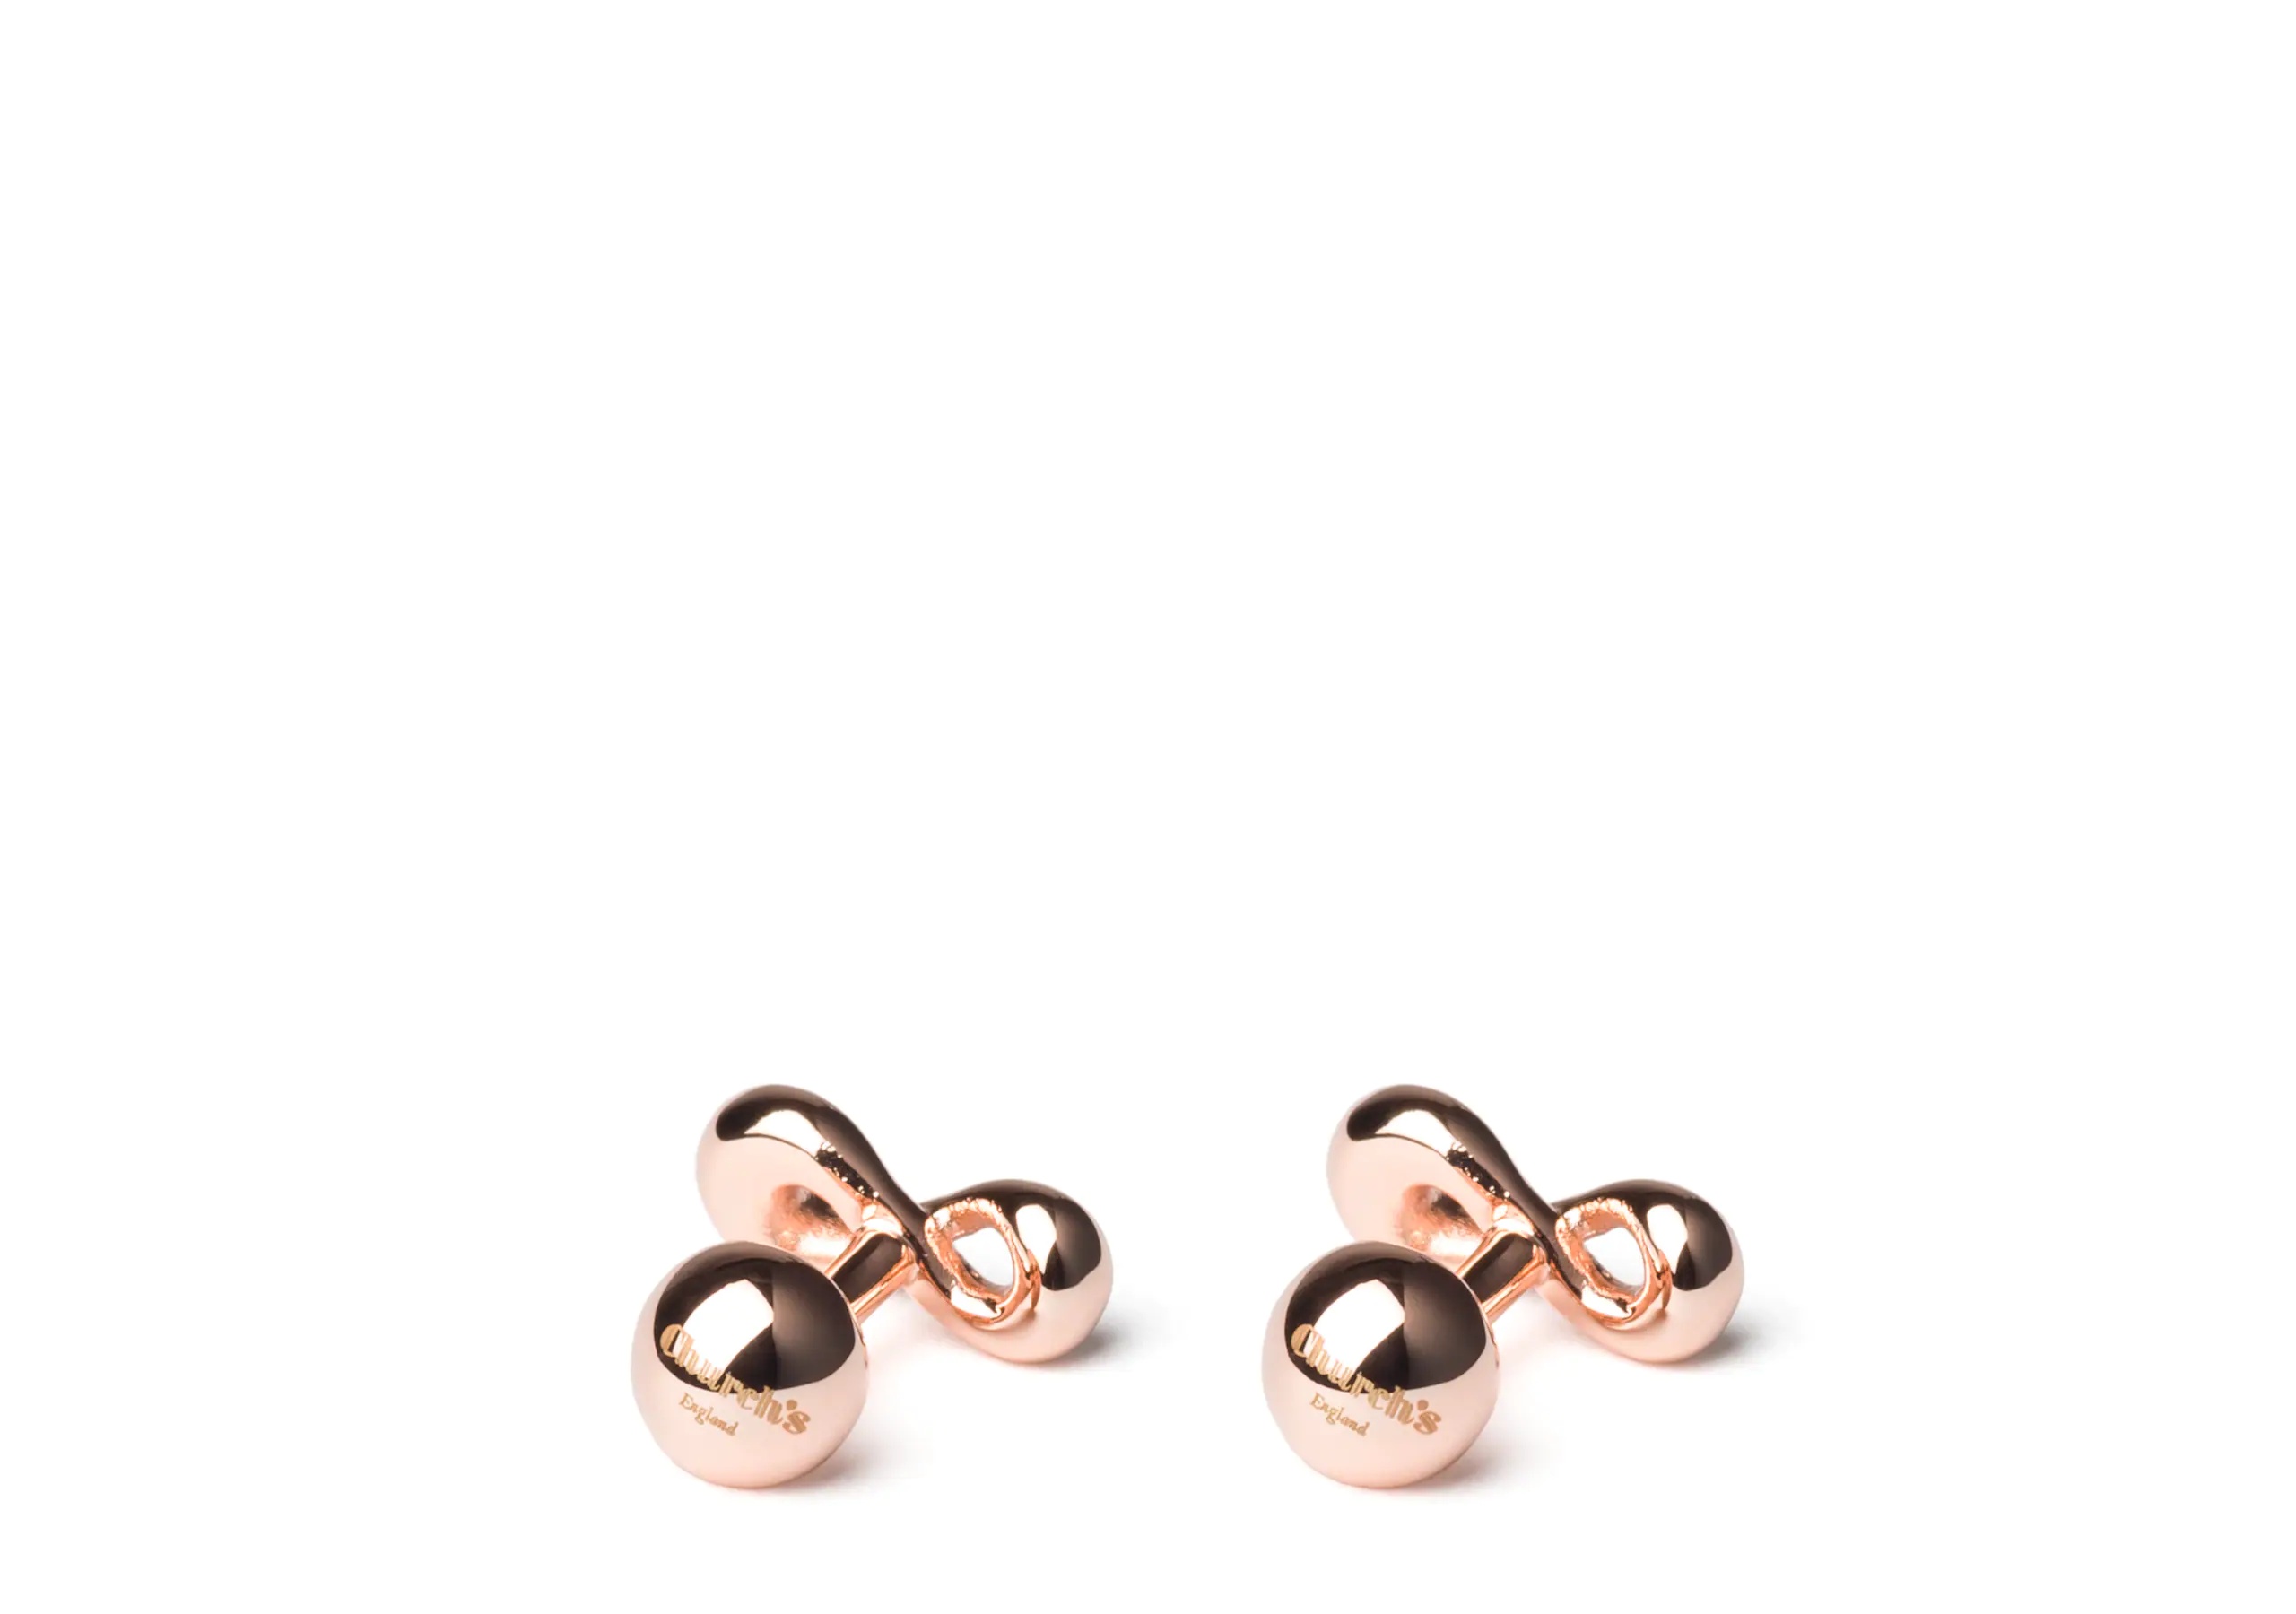 Infinity cufflink
Rose Gold Plated Infinity Knot Rose gold - 2